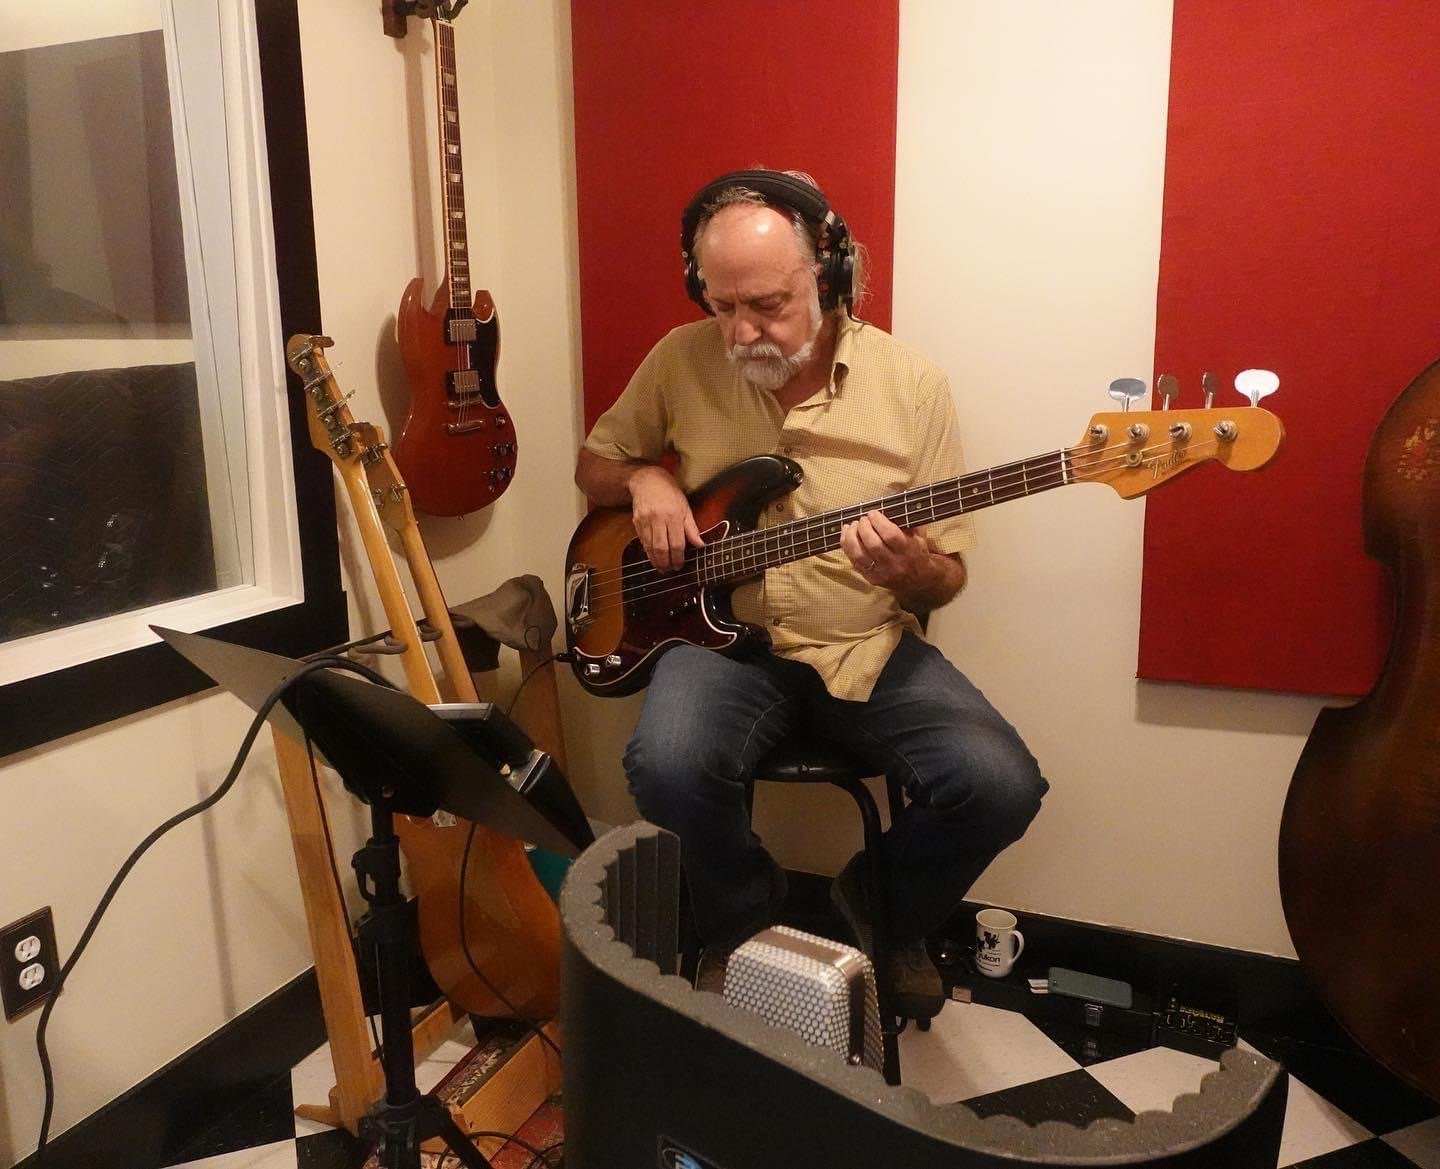 Dave Jacques showed us how to lay down bass tracks like a champ